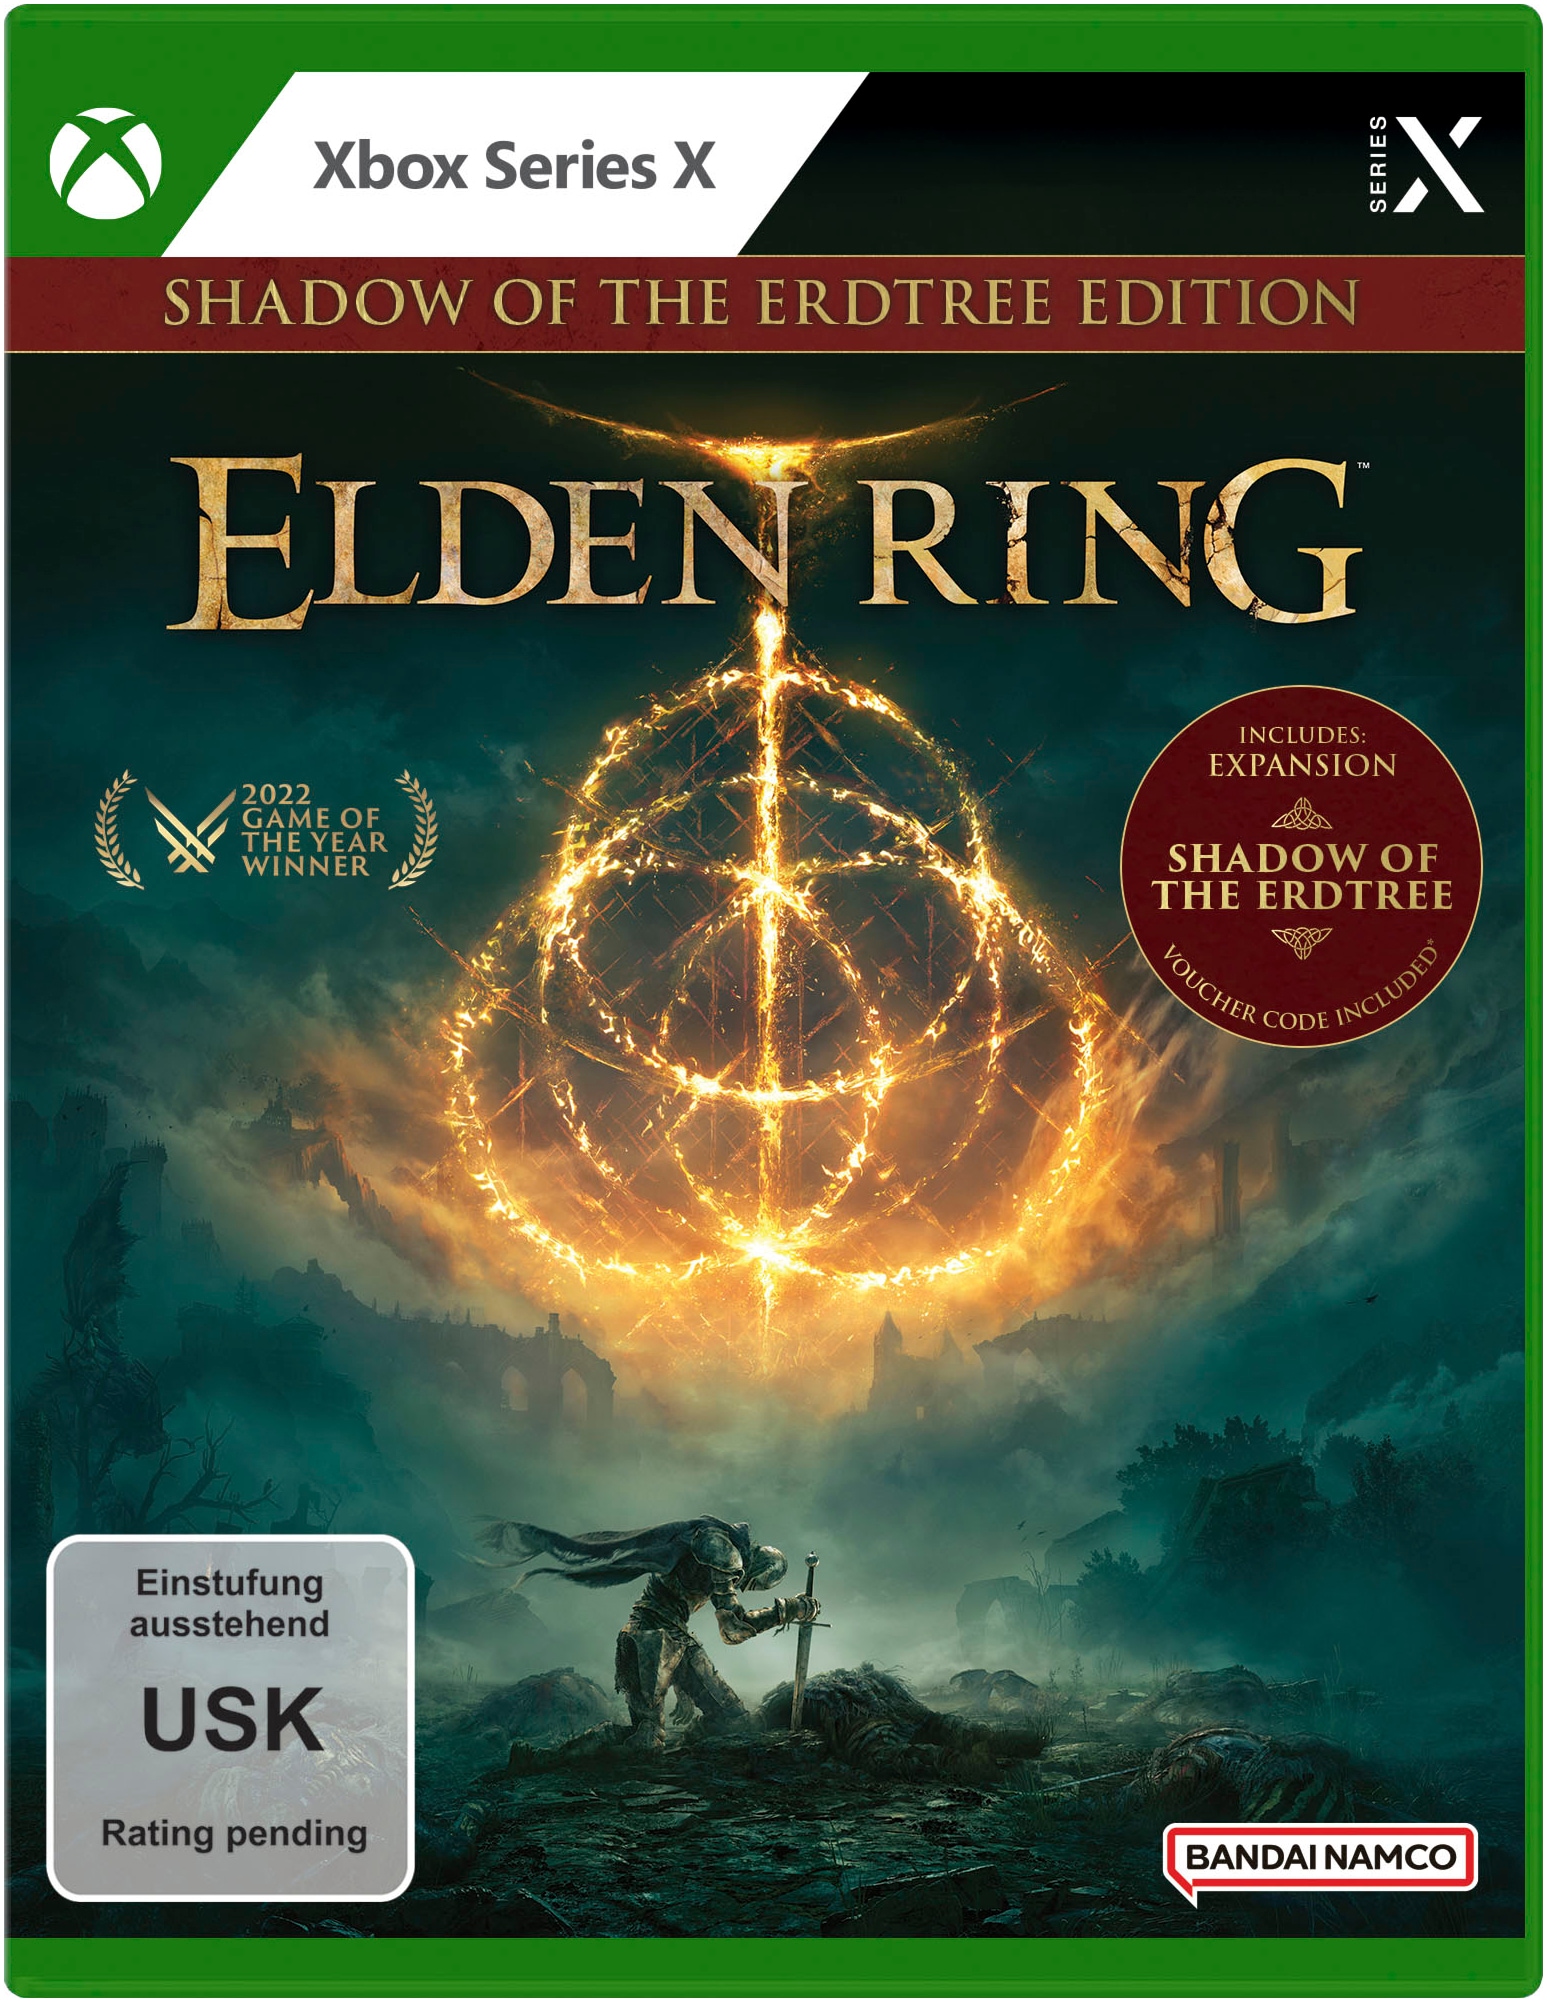 Spielesoftware »Elden Ring Shadow of the Erdtree Edition«, Xbox Series X